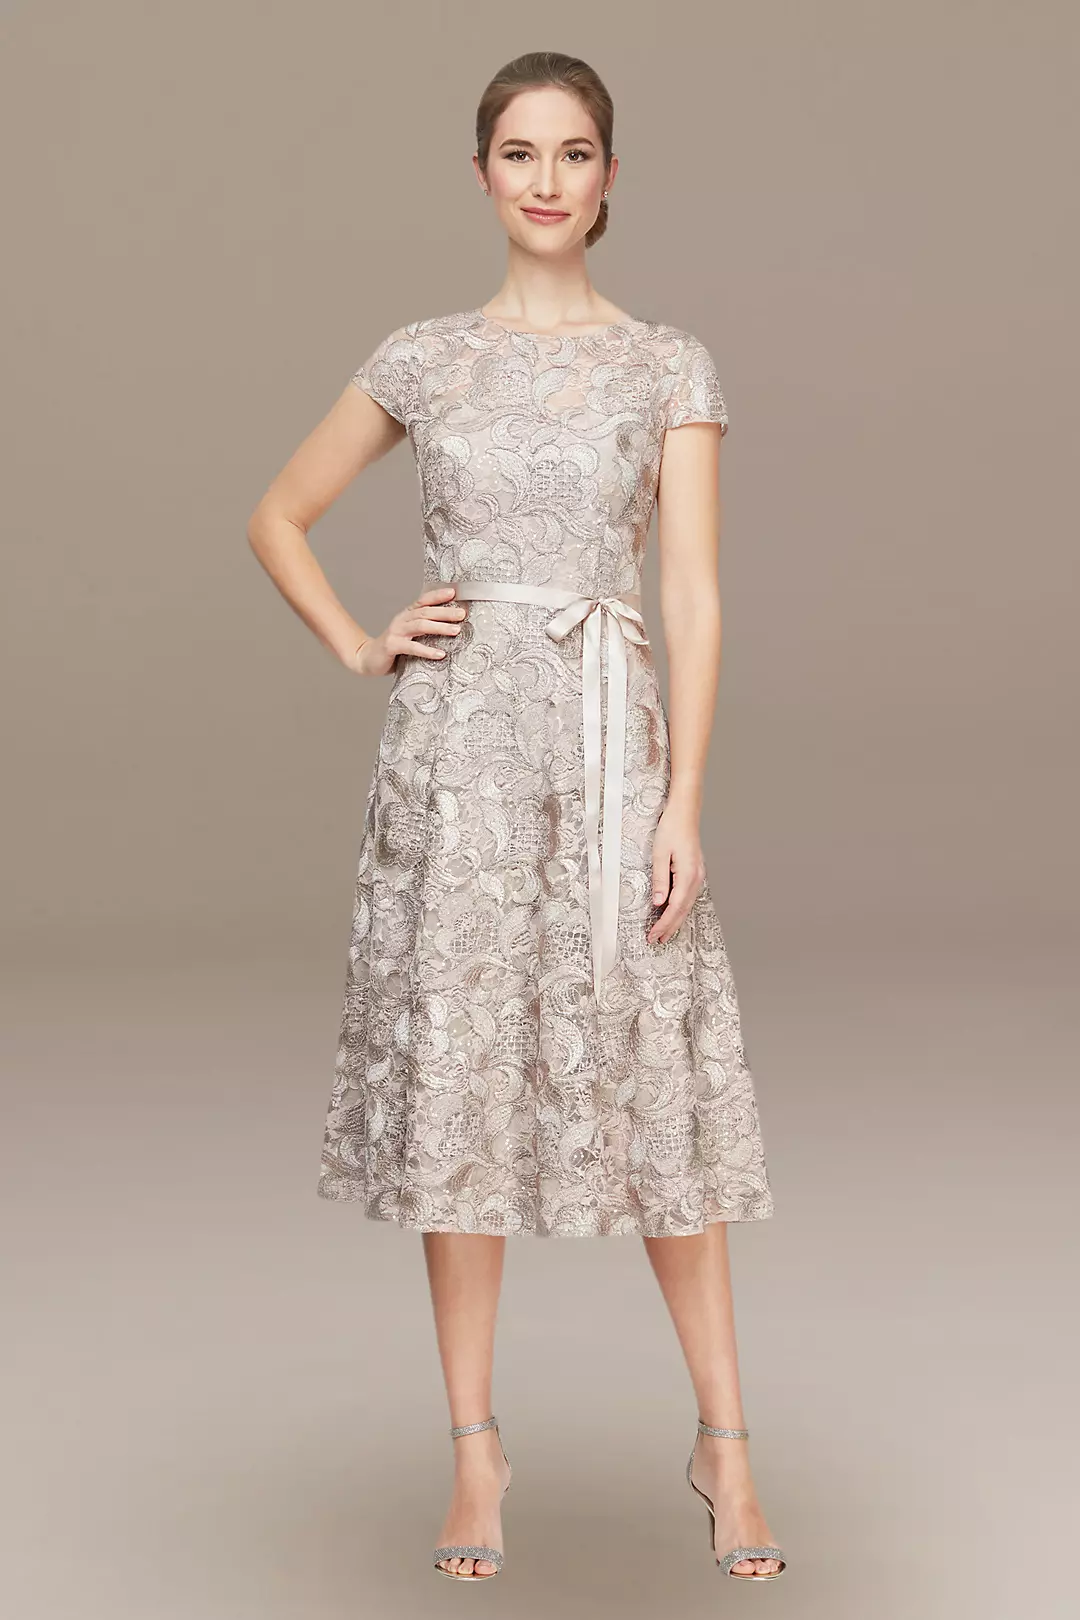 Lace Tea-Length A-Line Dress with Cap Sleeves | David's Bridal